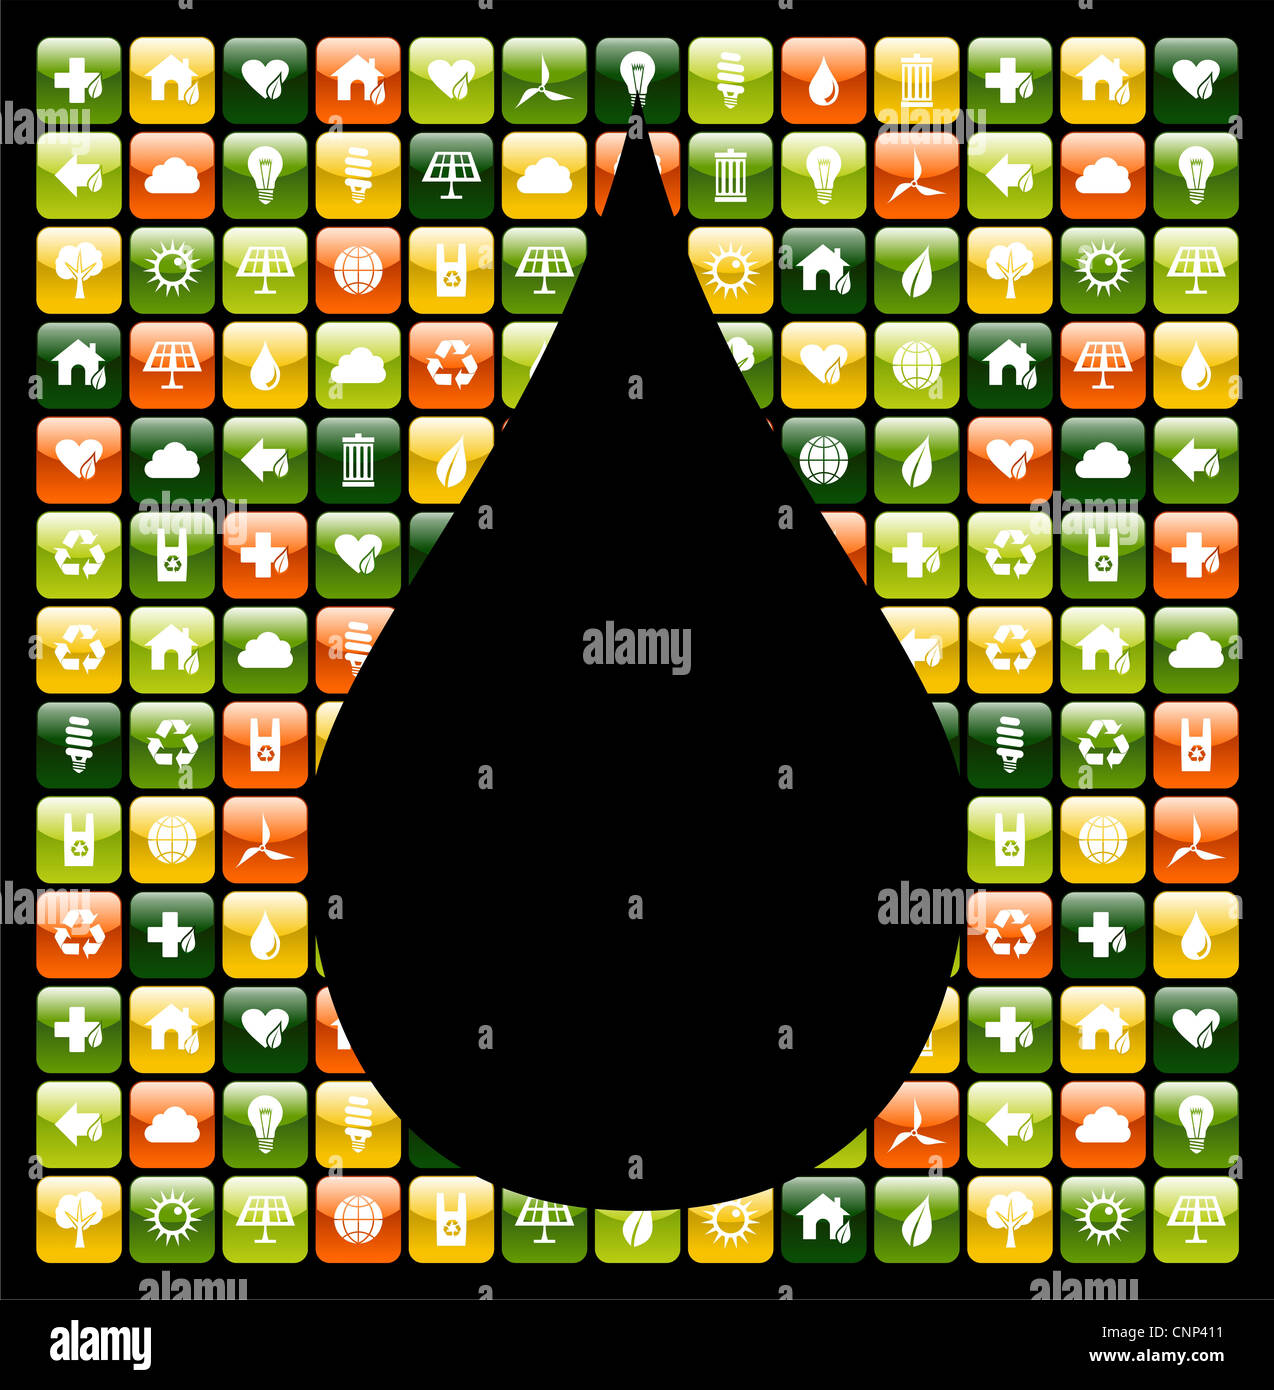 Water drop shape over eco friendly icon app buttons. Vector file available. Stock Photo